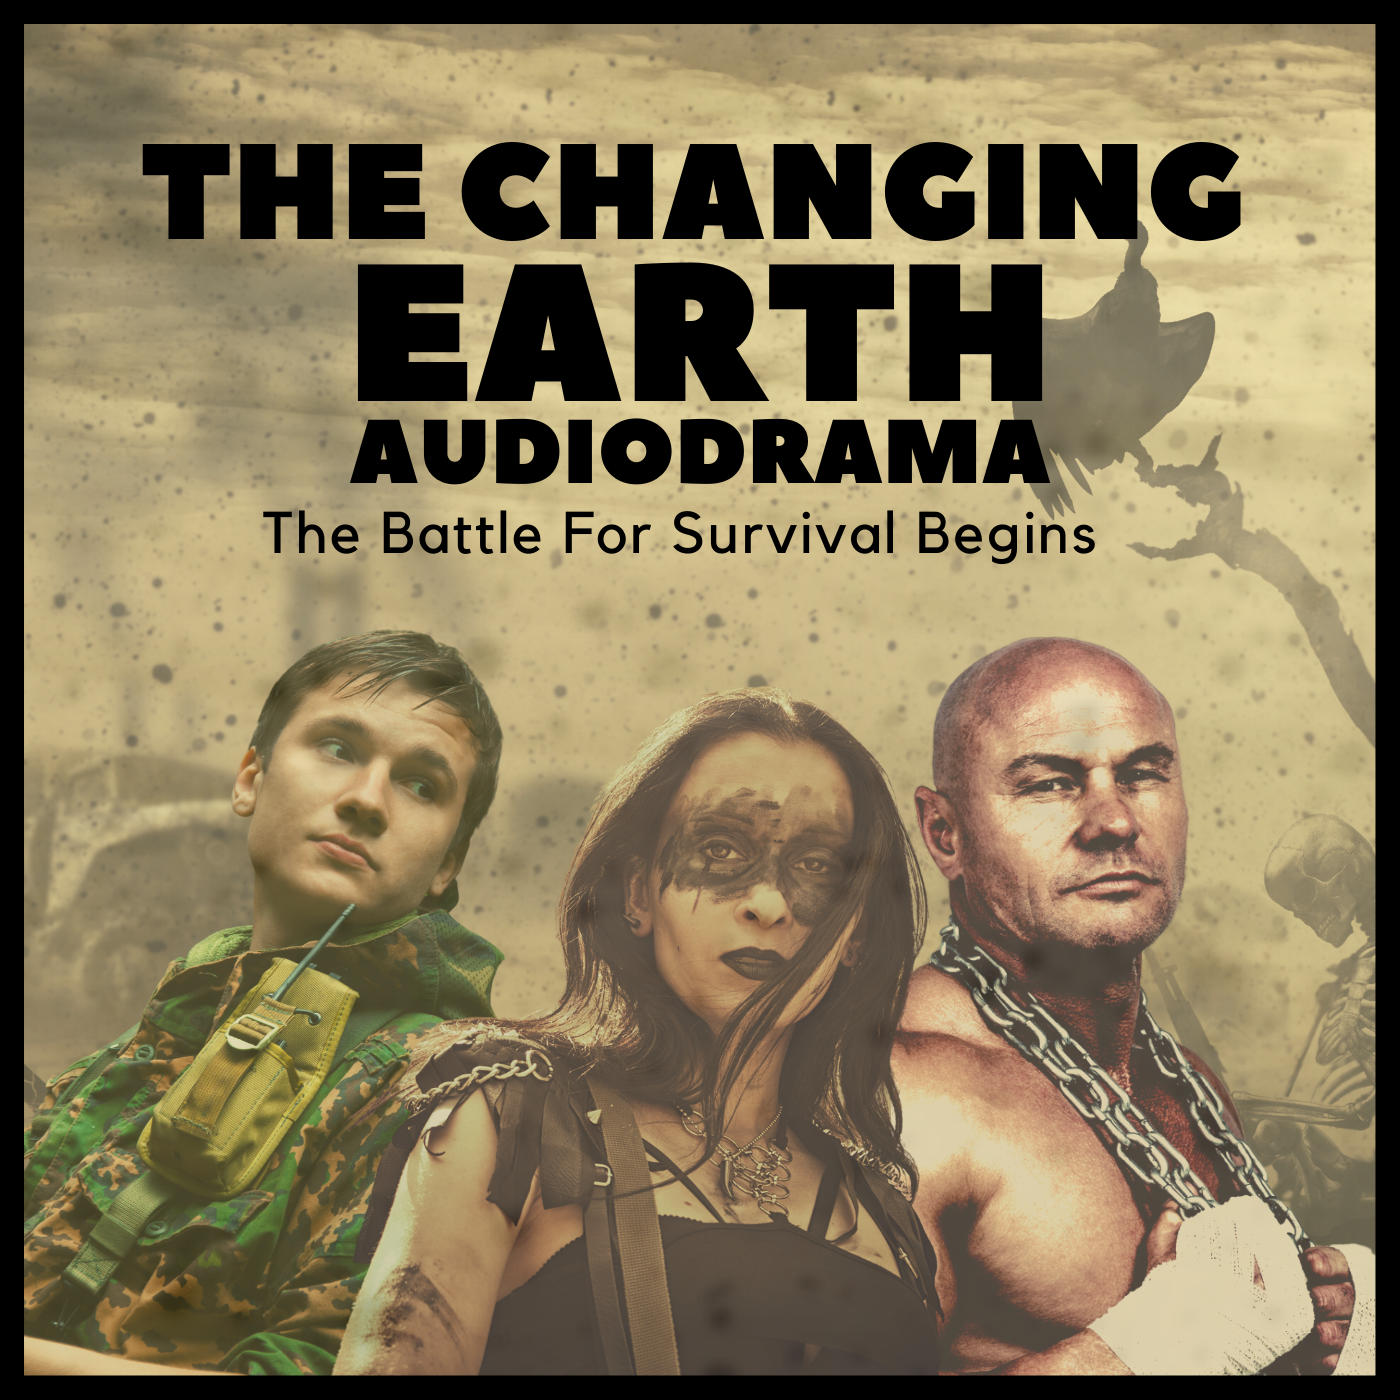 The Changing Earth Audio Drama